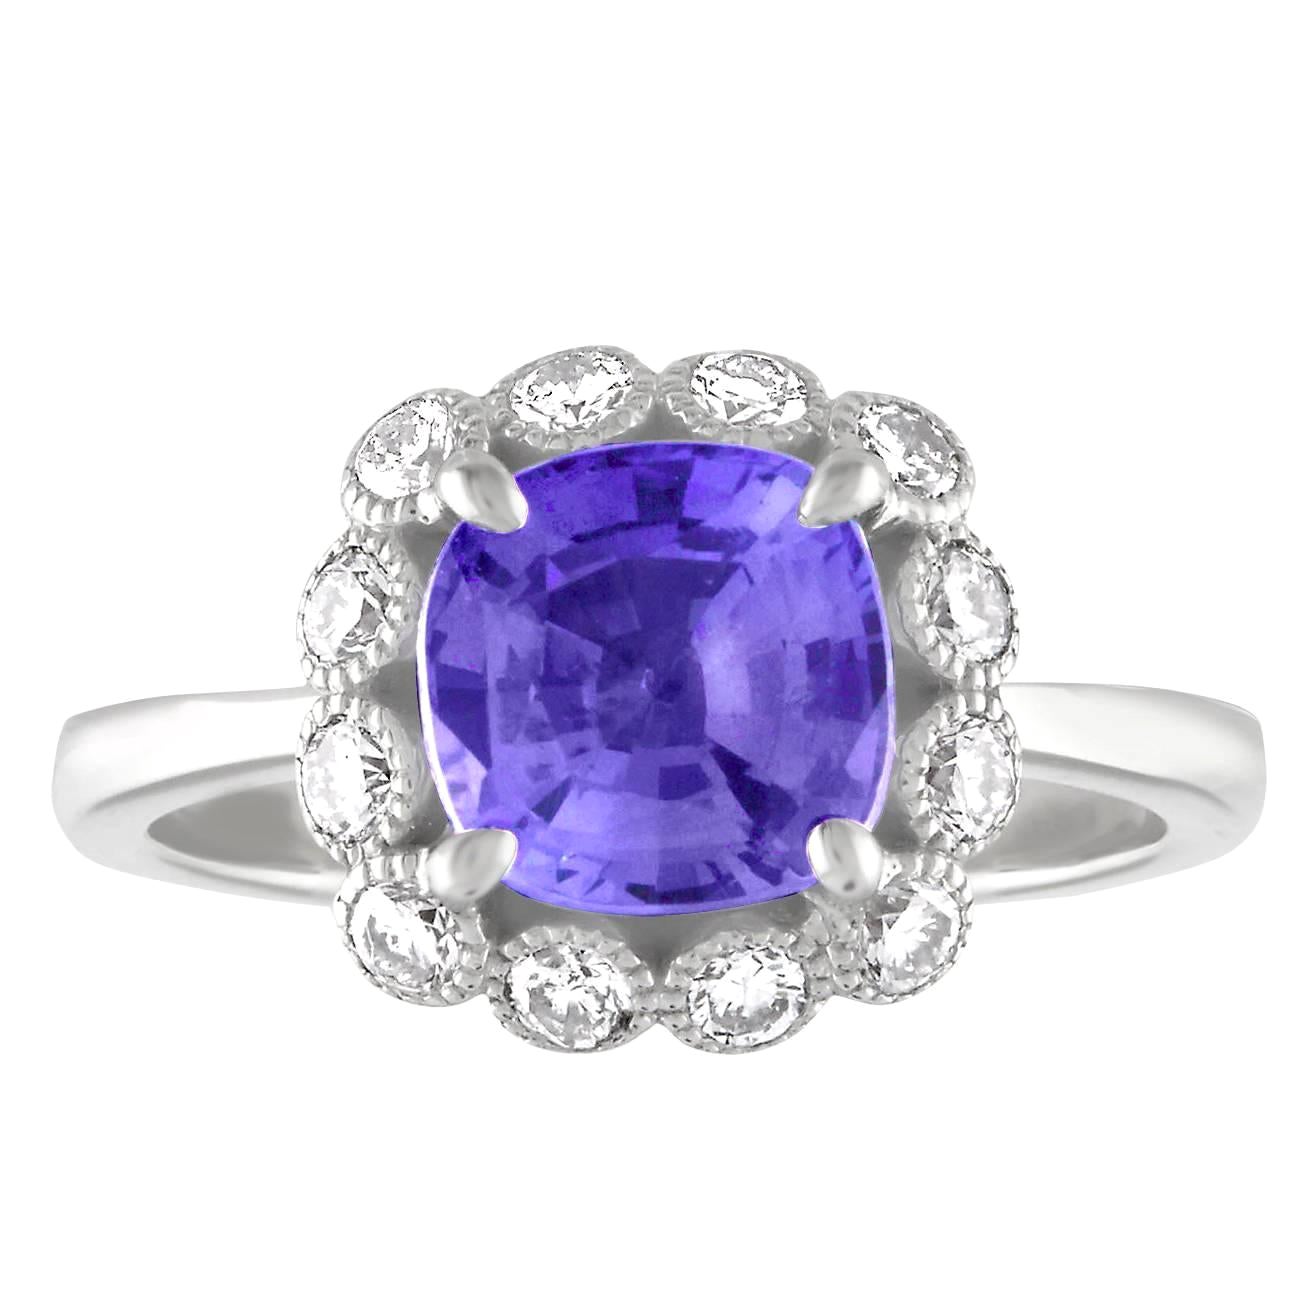 AGL Certified 2.59 Carat No Heat Violet Blue Sapphire Diamond Gold Ring For Sale